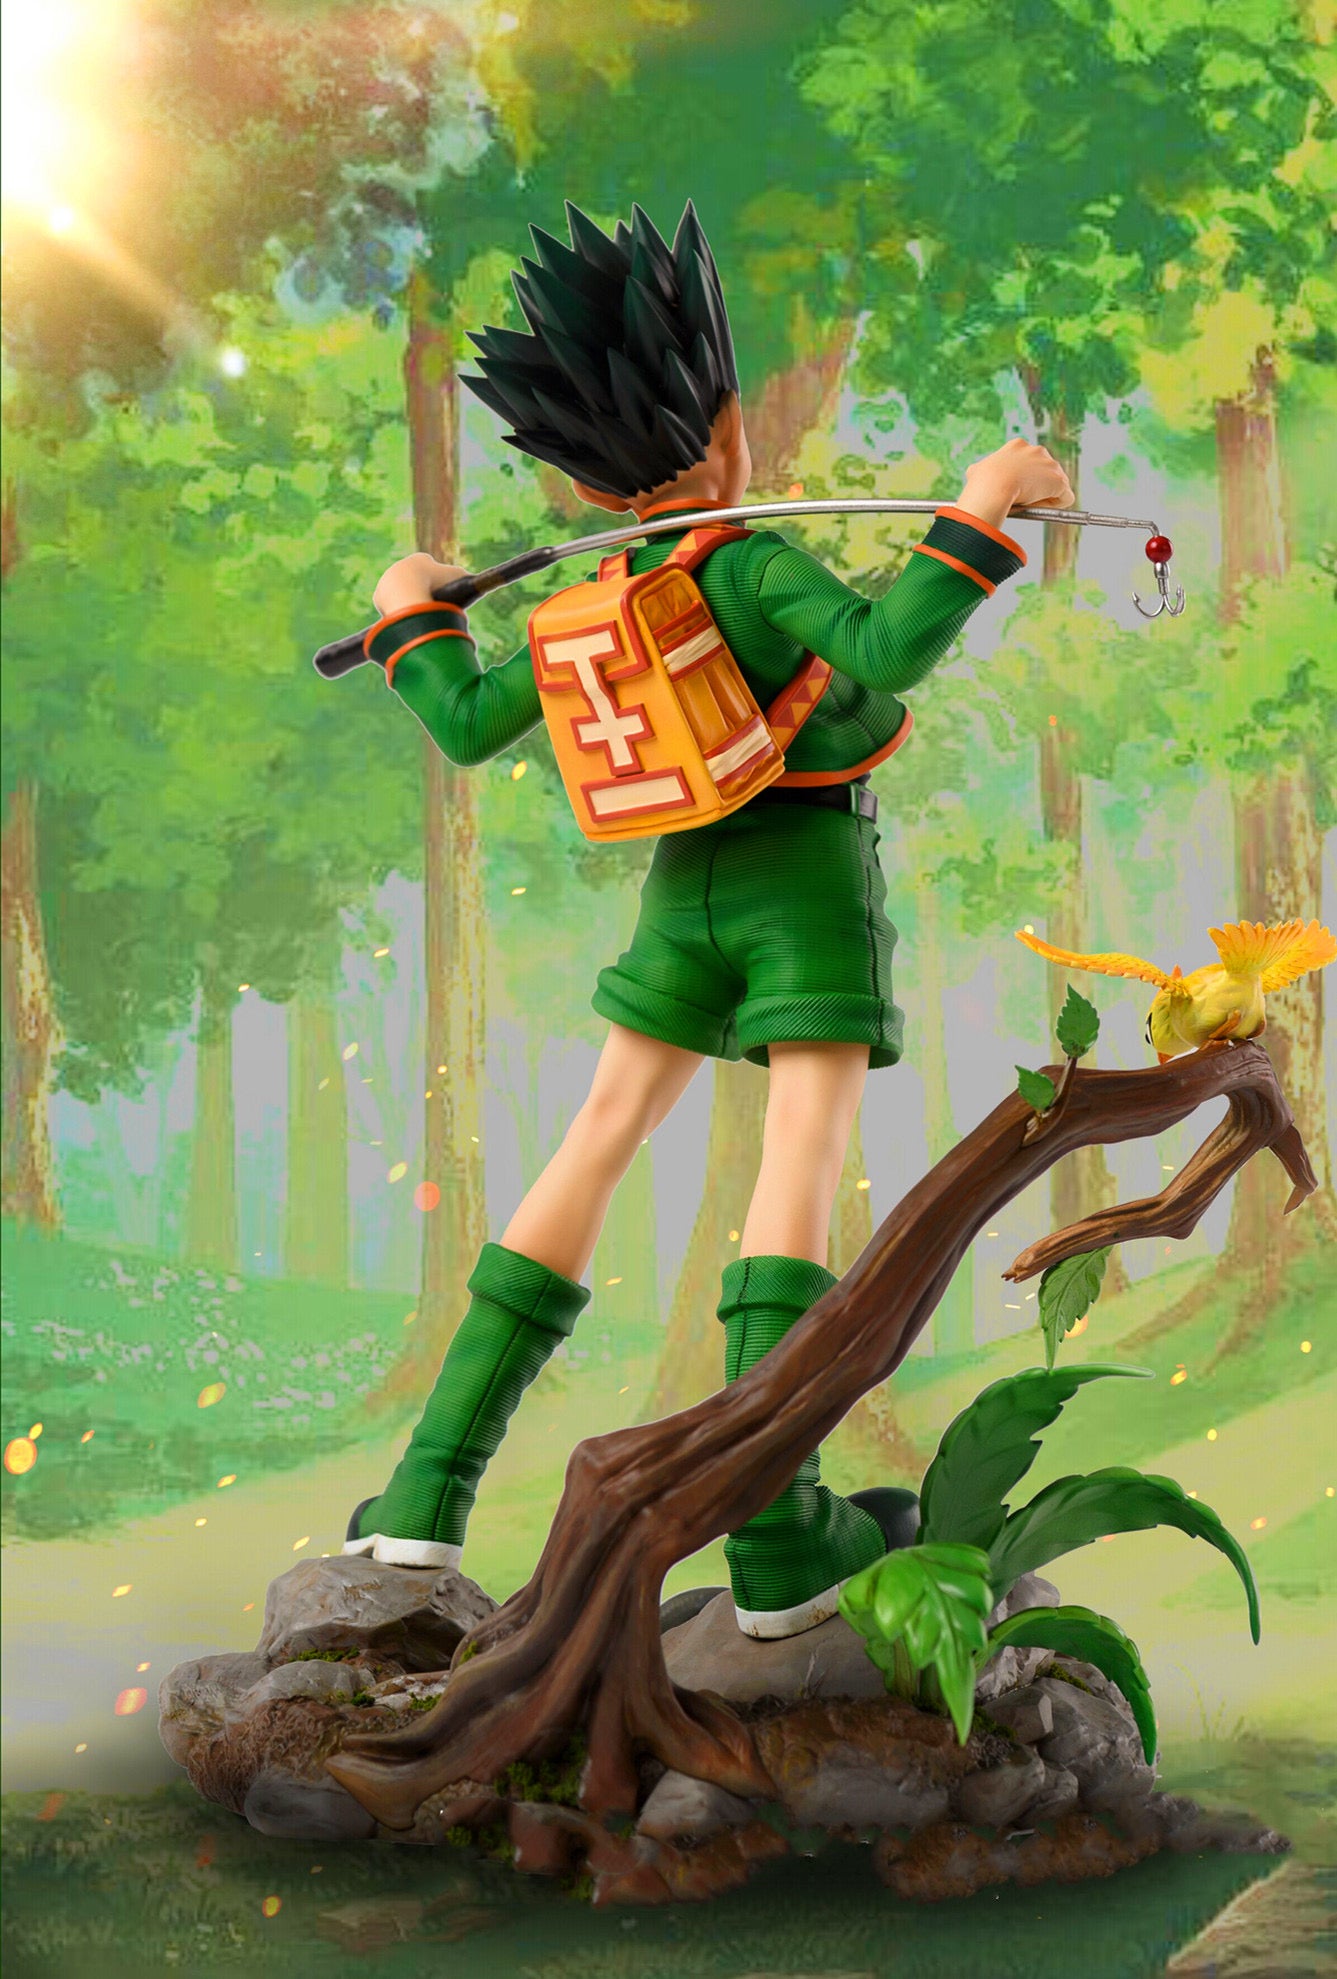 Studios: Stars Studios Character: GON. FREECSS Series: A Series of  Characters of Hunter X Hunter (SD Scale) Name of Work: Ep.1 GON. FREECSS  Dimensions: (H)21cm (W)22cm (L)22cm Scale of Item: SD Materi